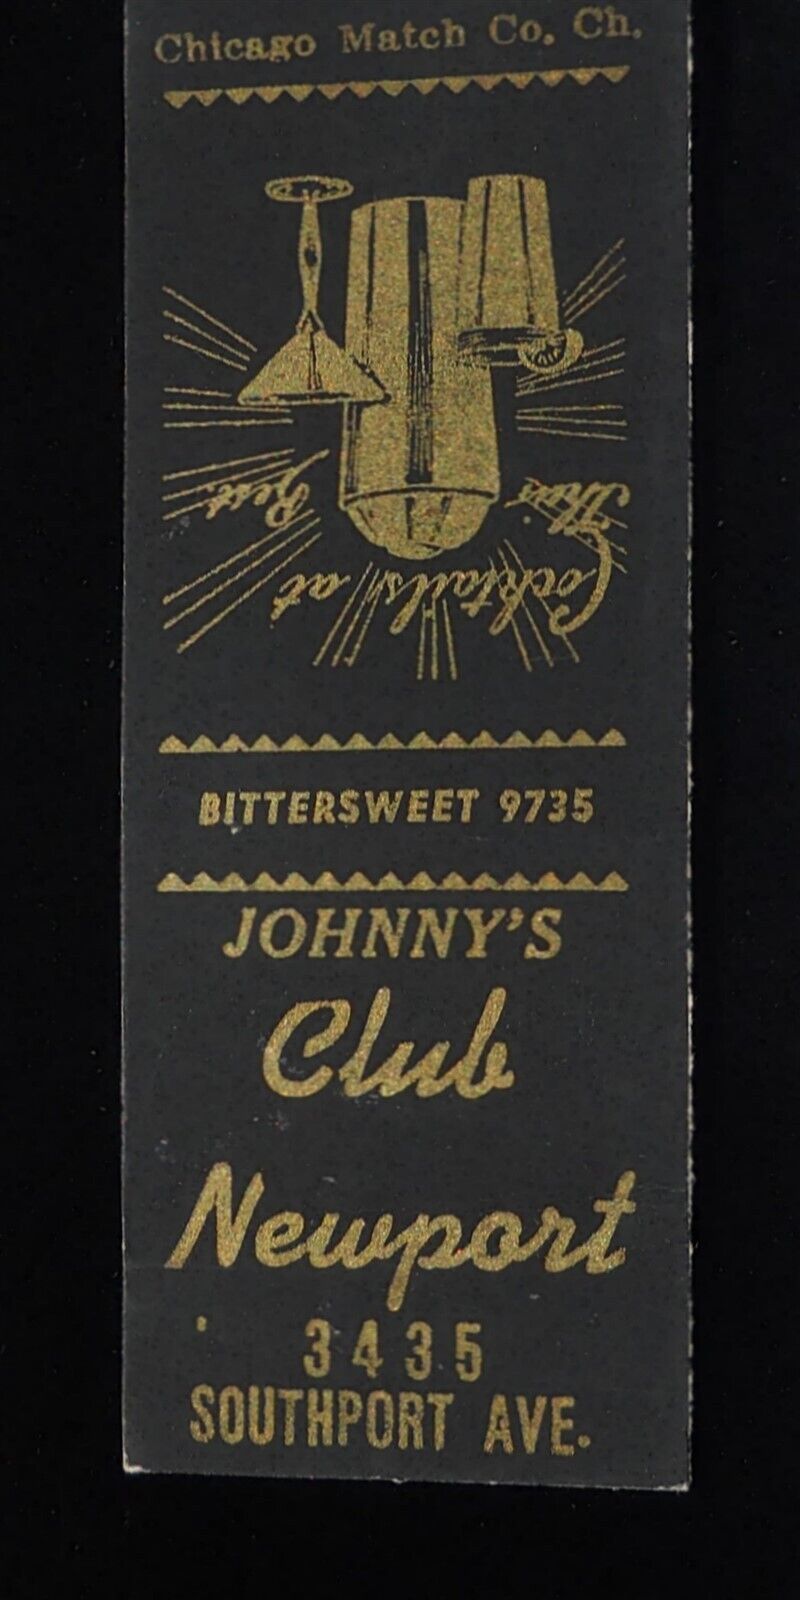 1930s? Johnny\'s Club Newport Phone Bittersweet 9735 3435 Southport Ave. Chicago